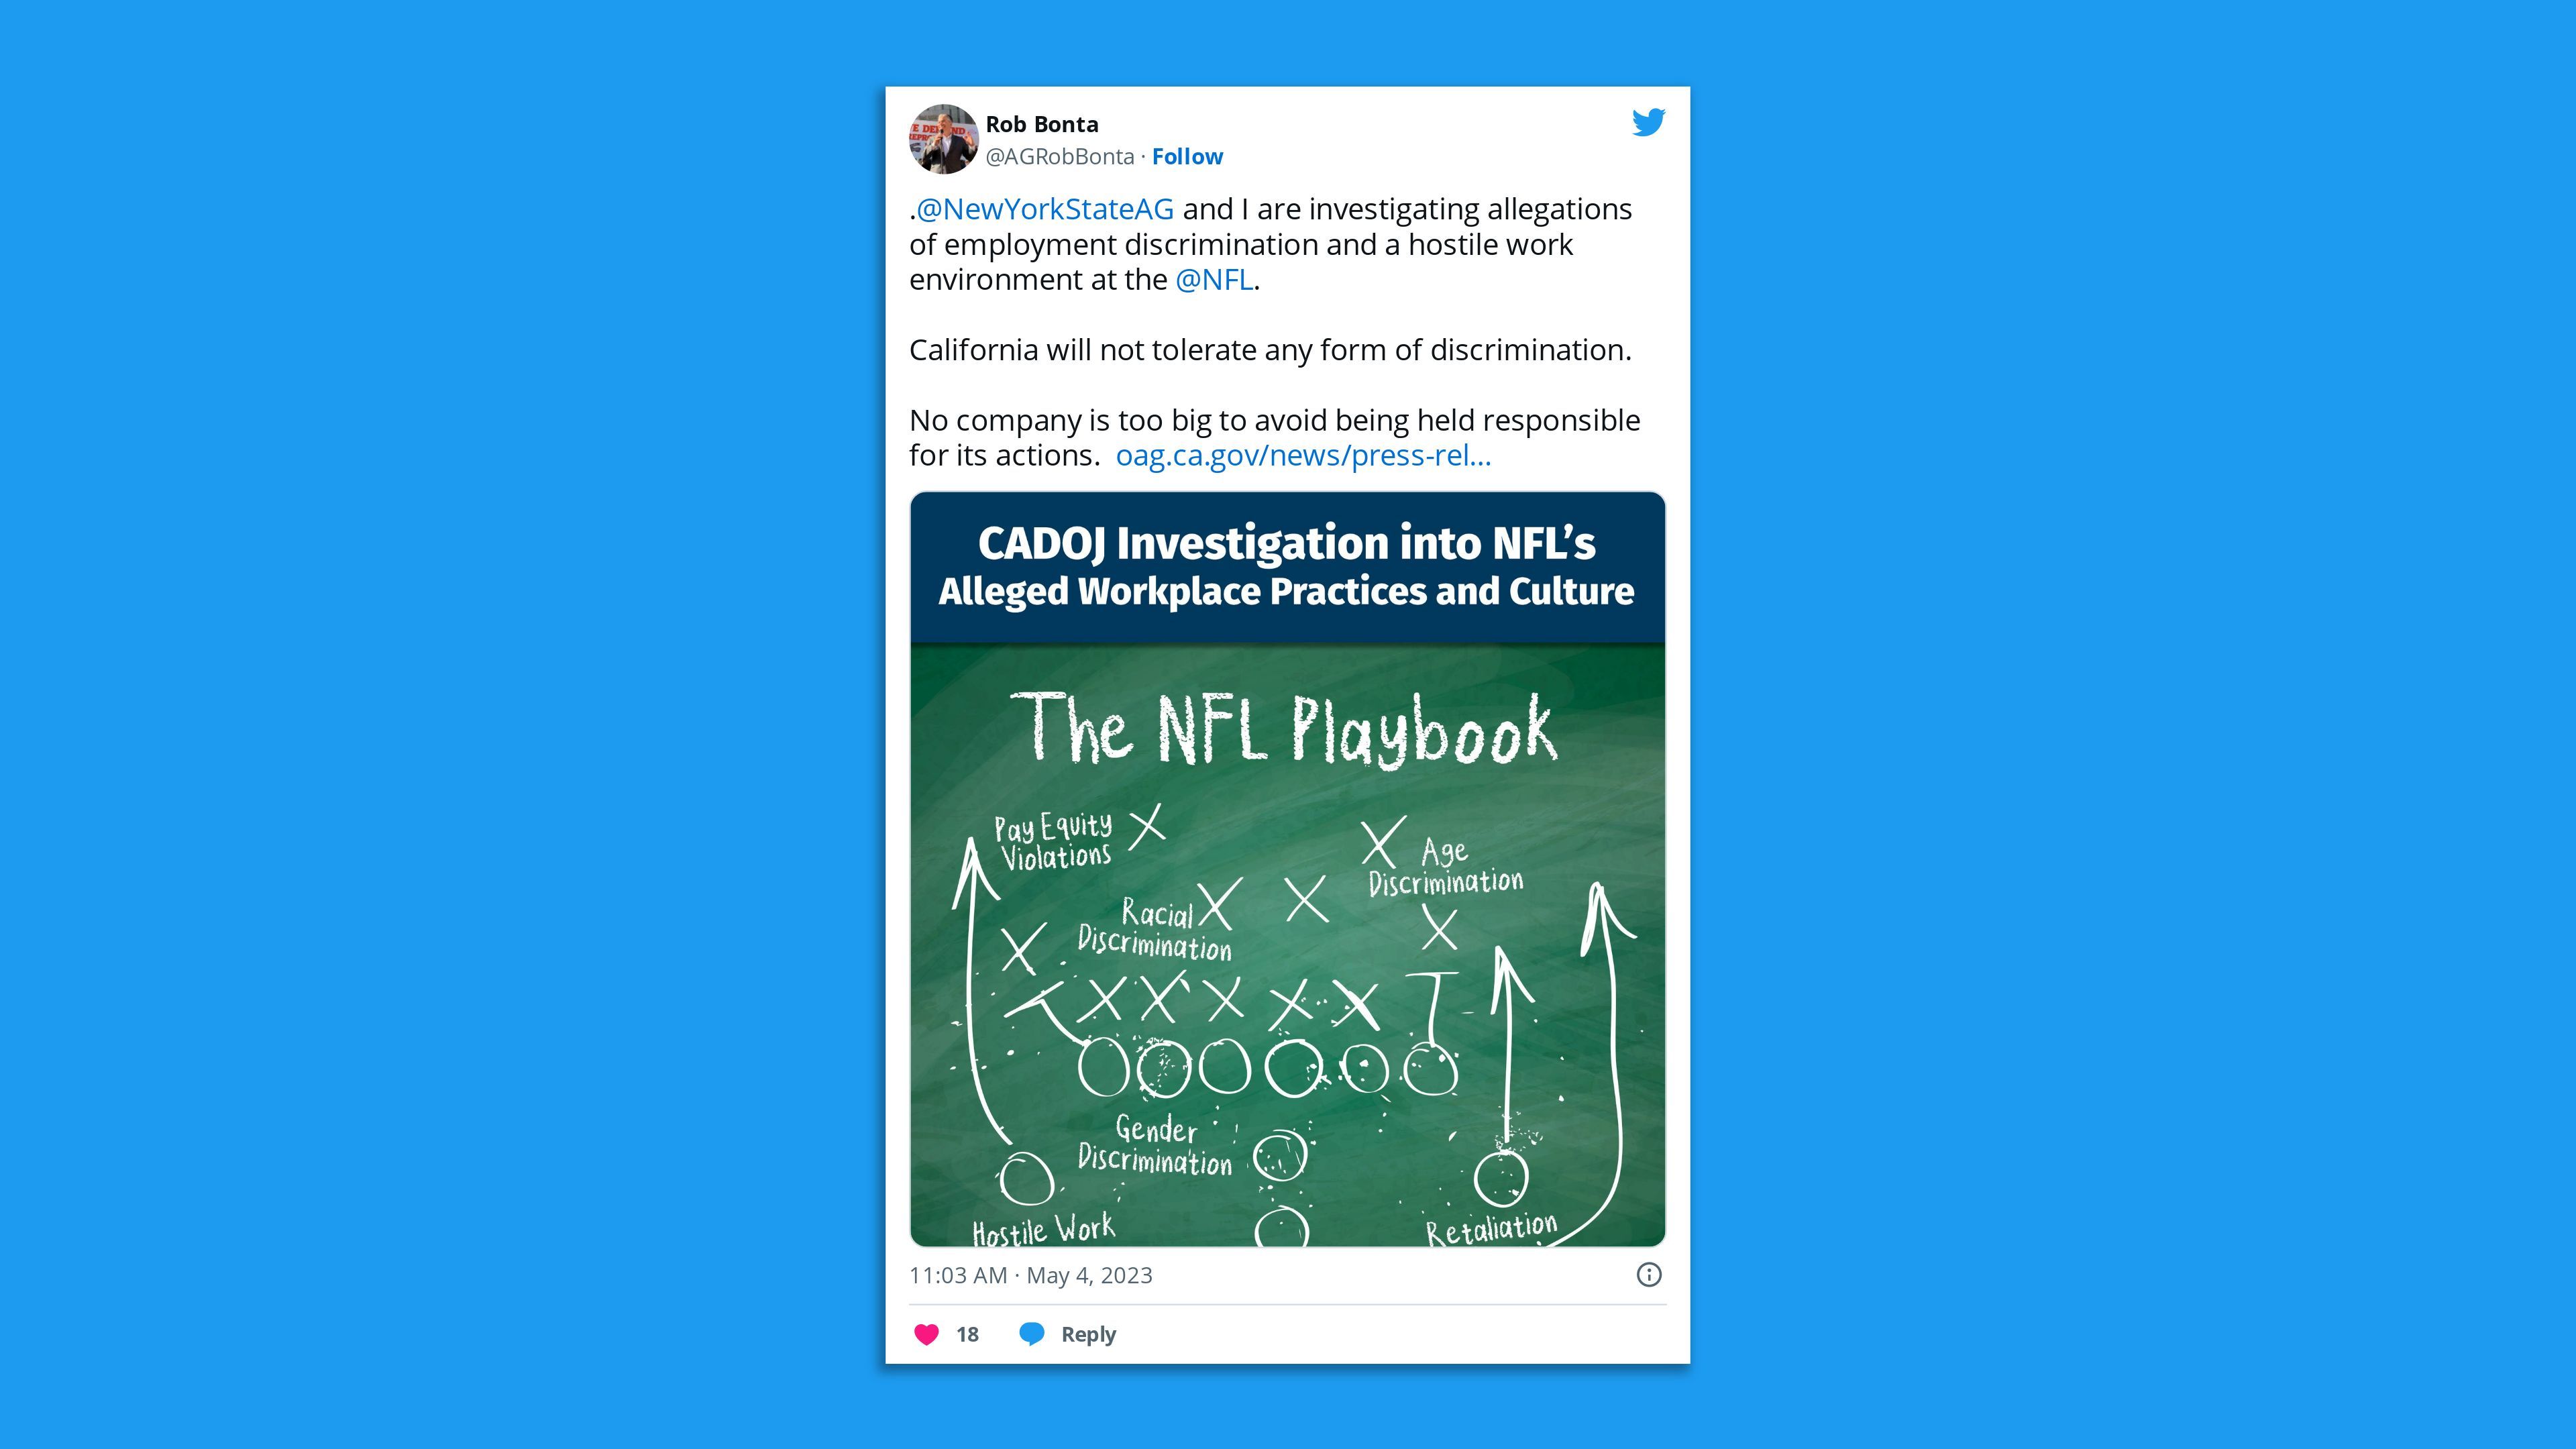 A screenshot of a tweet by California's attorney general stating: ". @NewYorkStateAG  and I are investigating allegations of employment discrimination and a hostile work environment at the  @NFL .  California will not tolerate any form of discrimination.  No company is too big to avoid being held responsible for its actions."